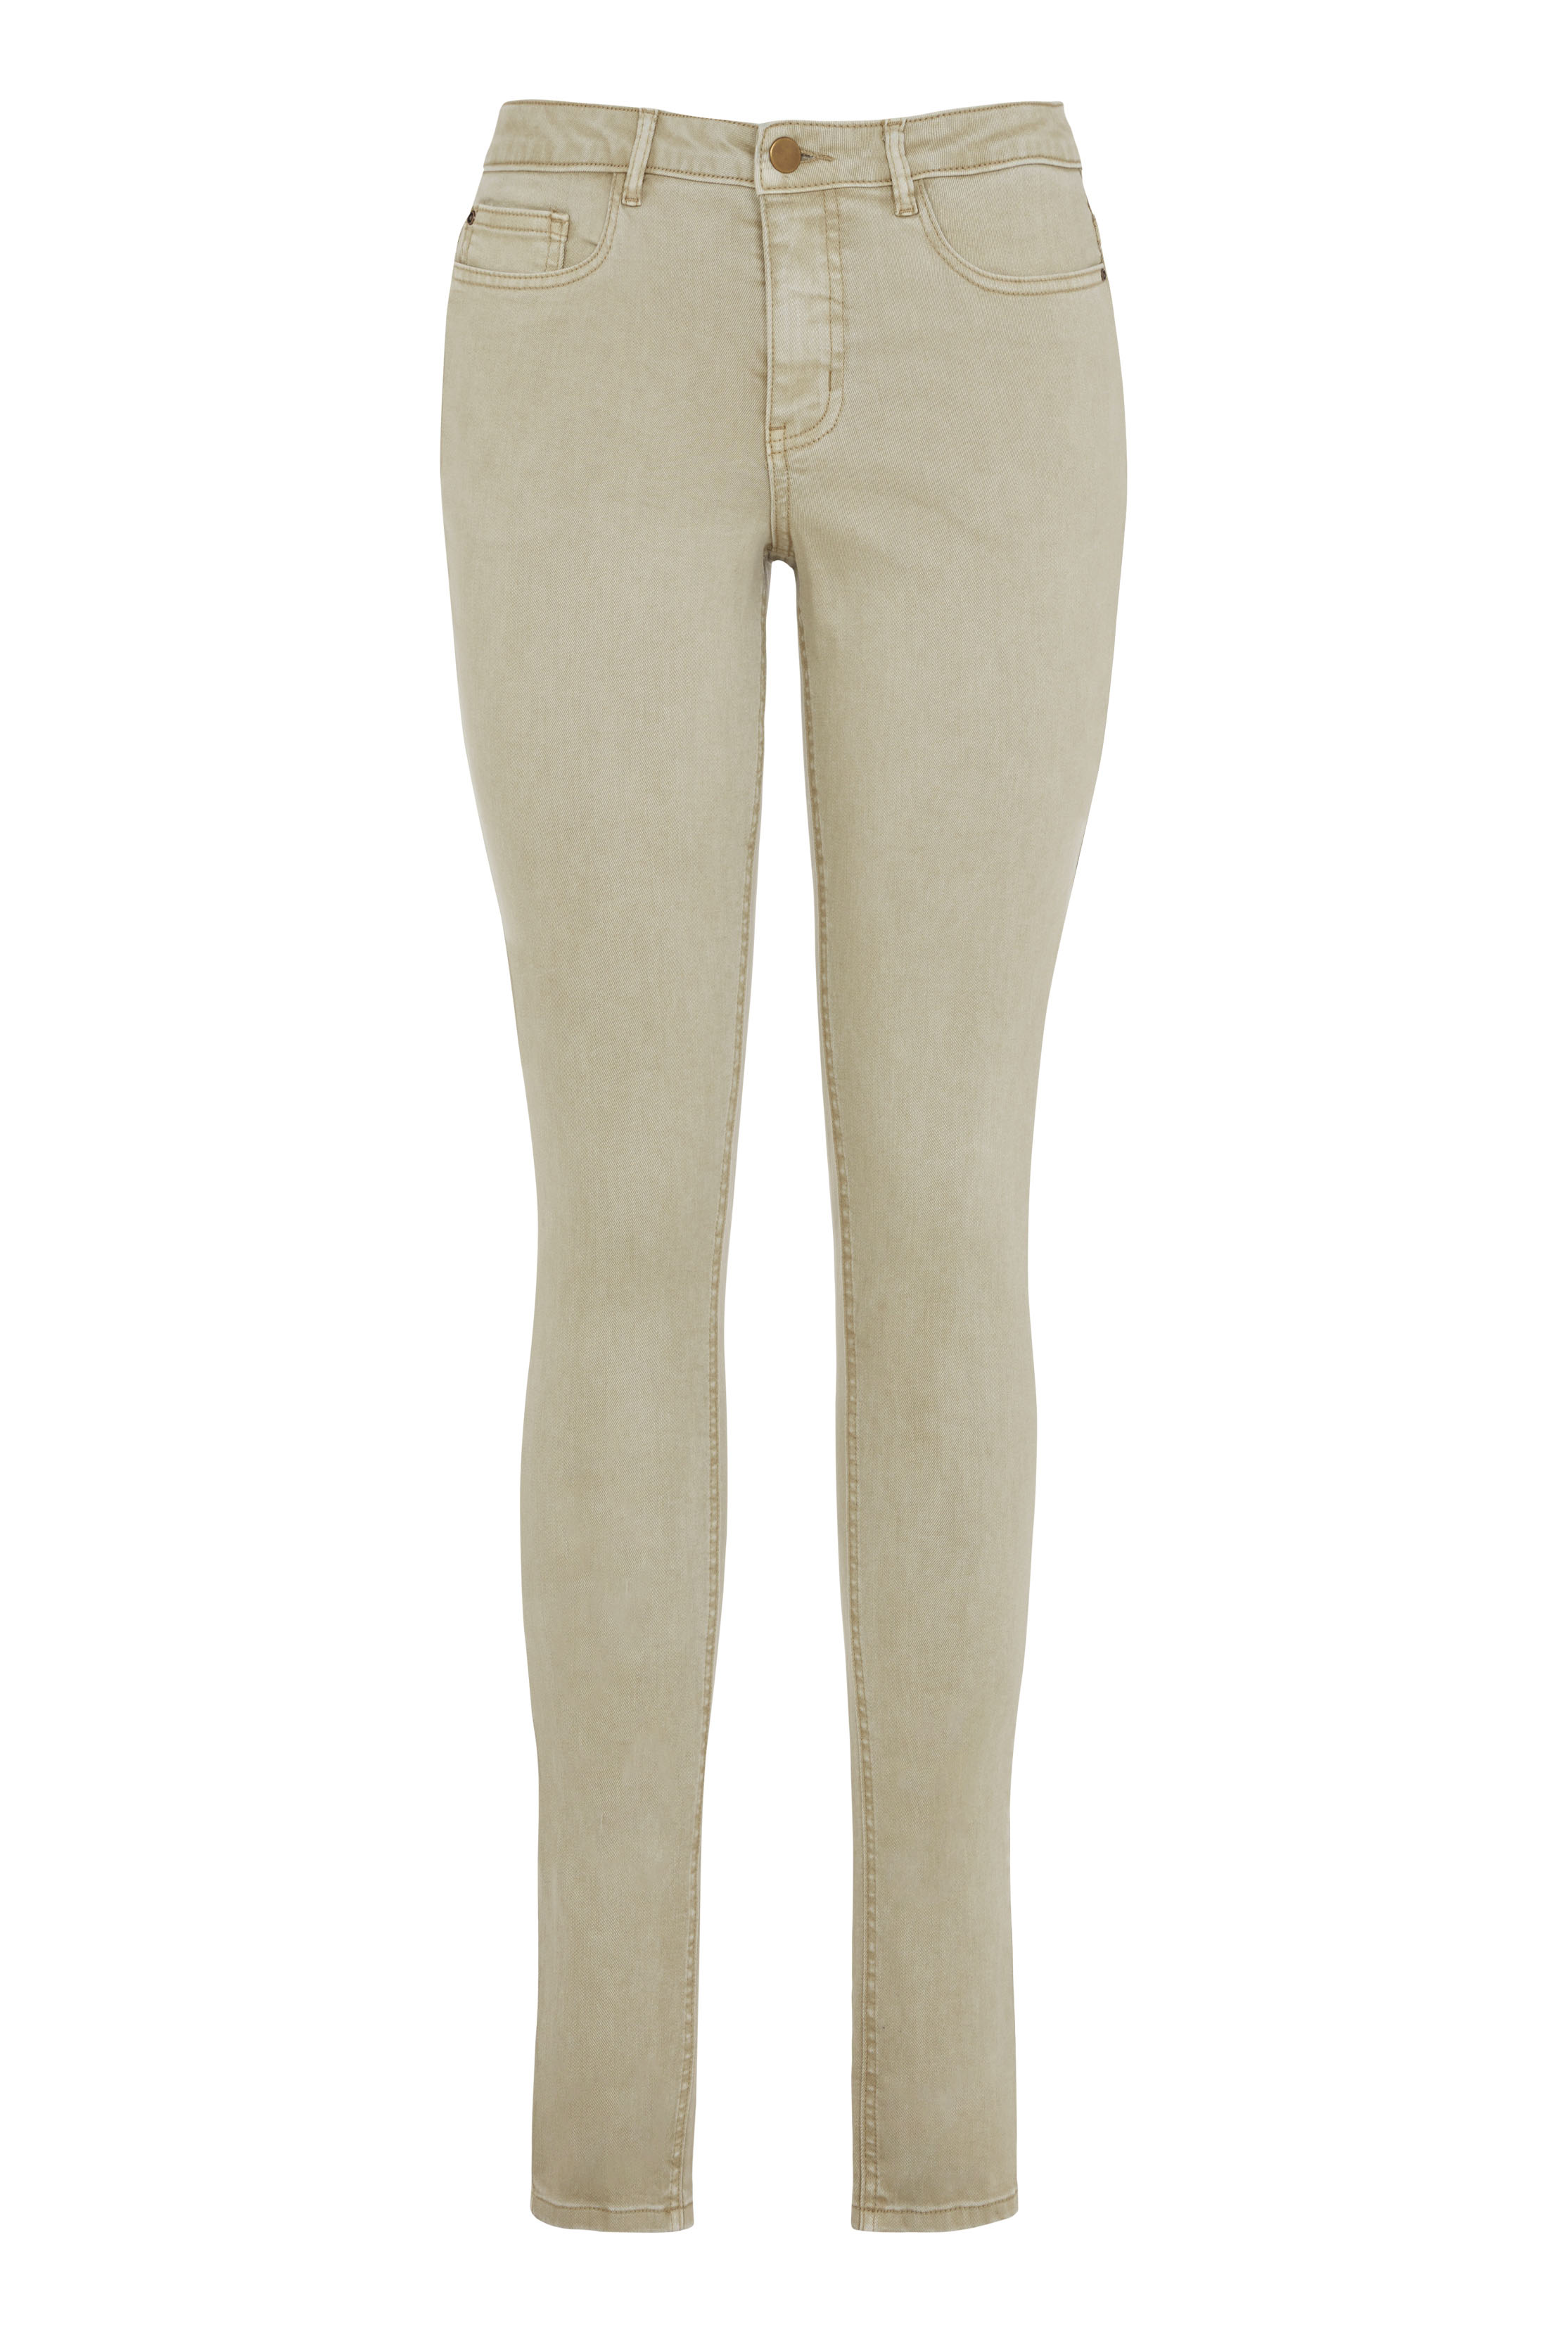 Tan Skinny Low Rise Jeans | Long Tall Sally